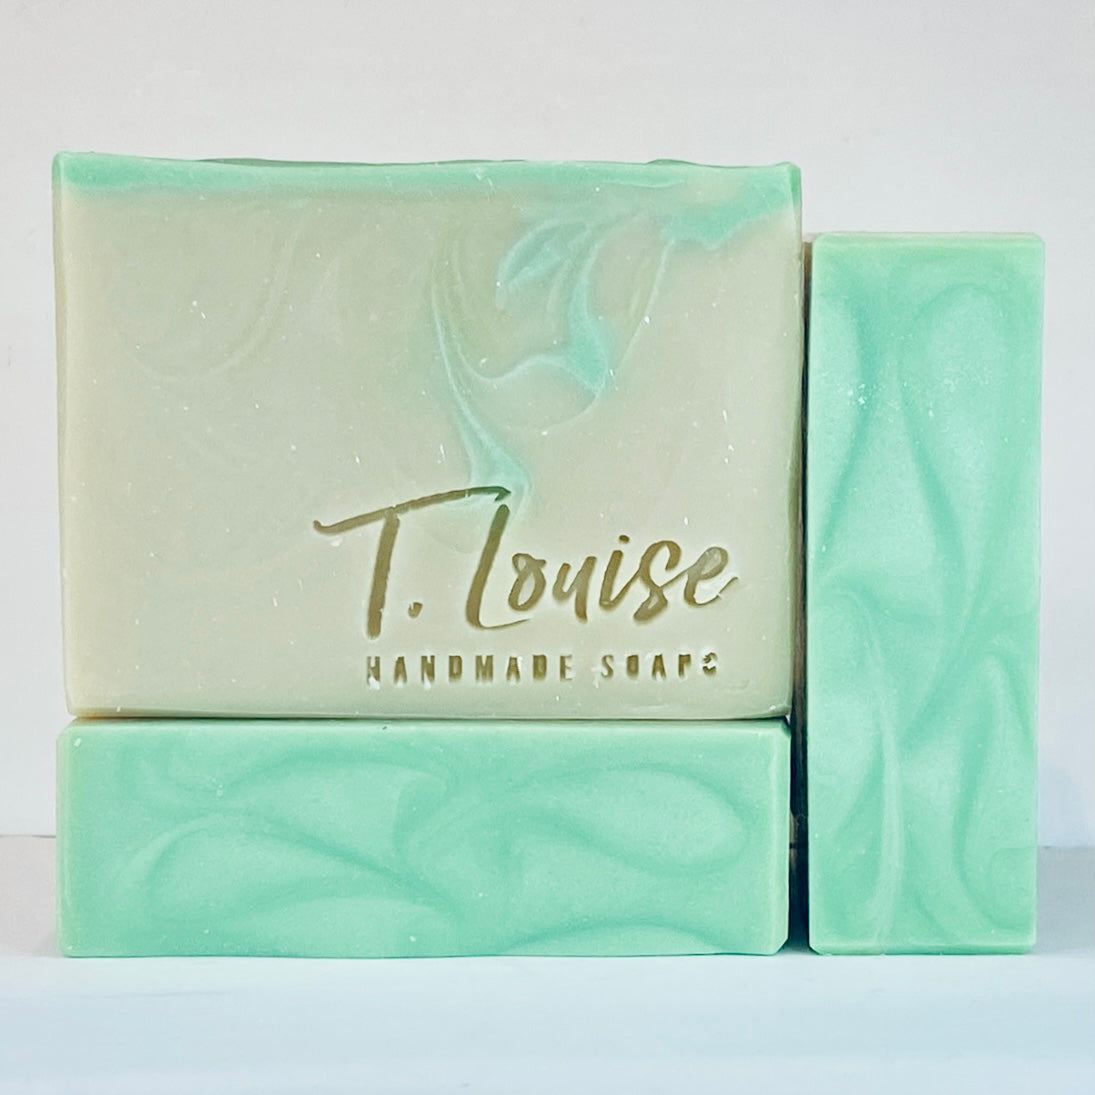 Evergreen Forest - Coconut-Free Handmade soapd / TLOUISESOAPS.COM